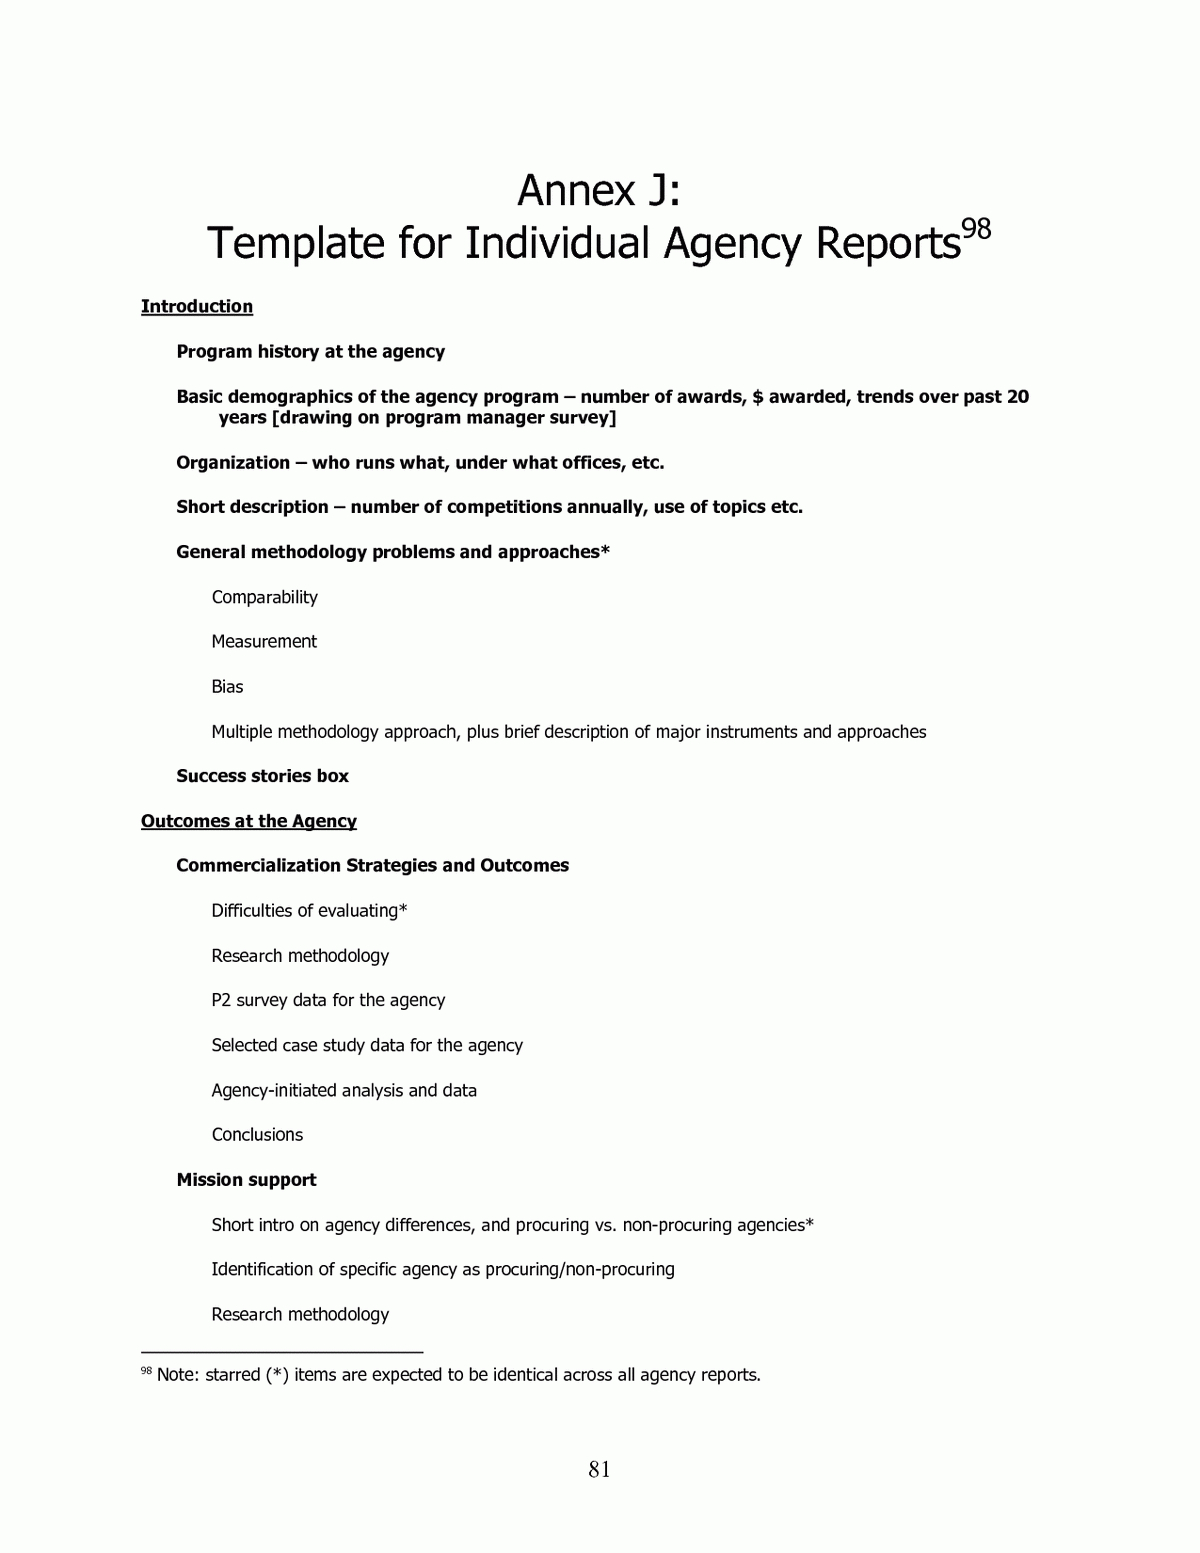 Annex J Template For Individual Agency Reports | An With Regard To Research Project Report Template